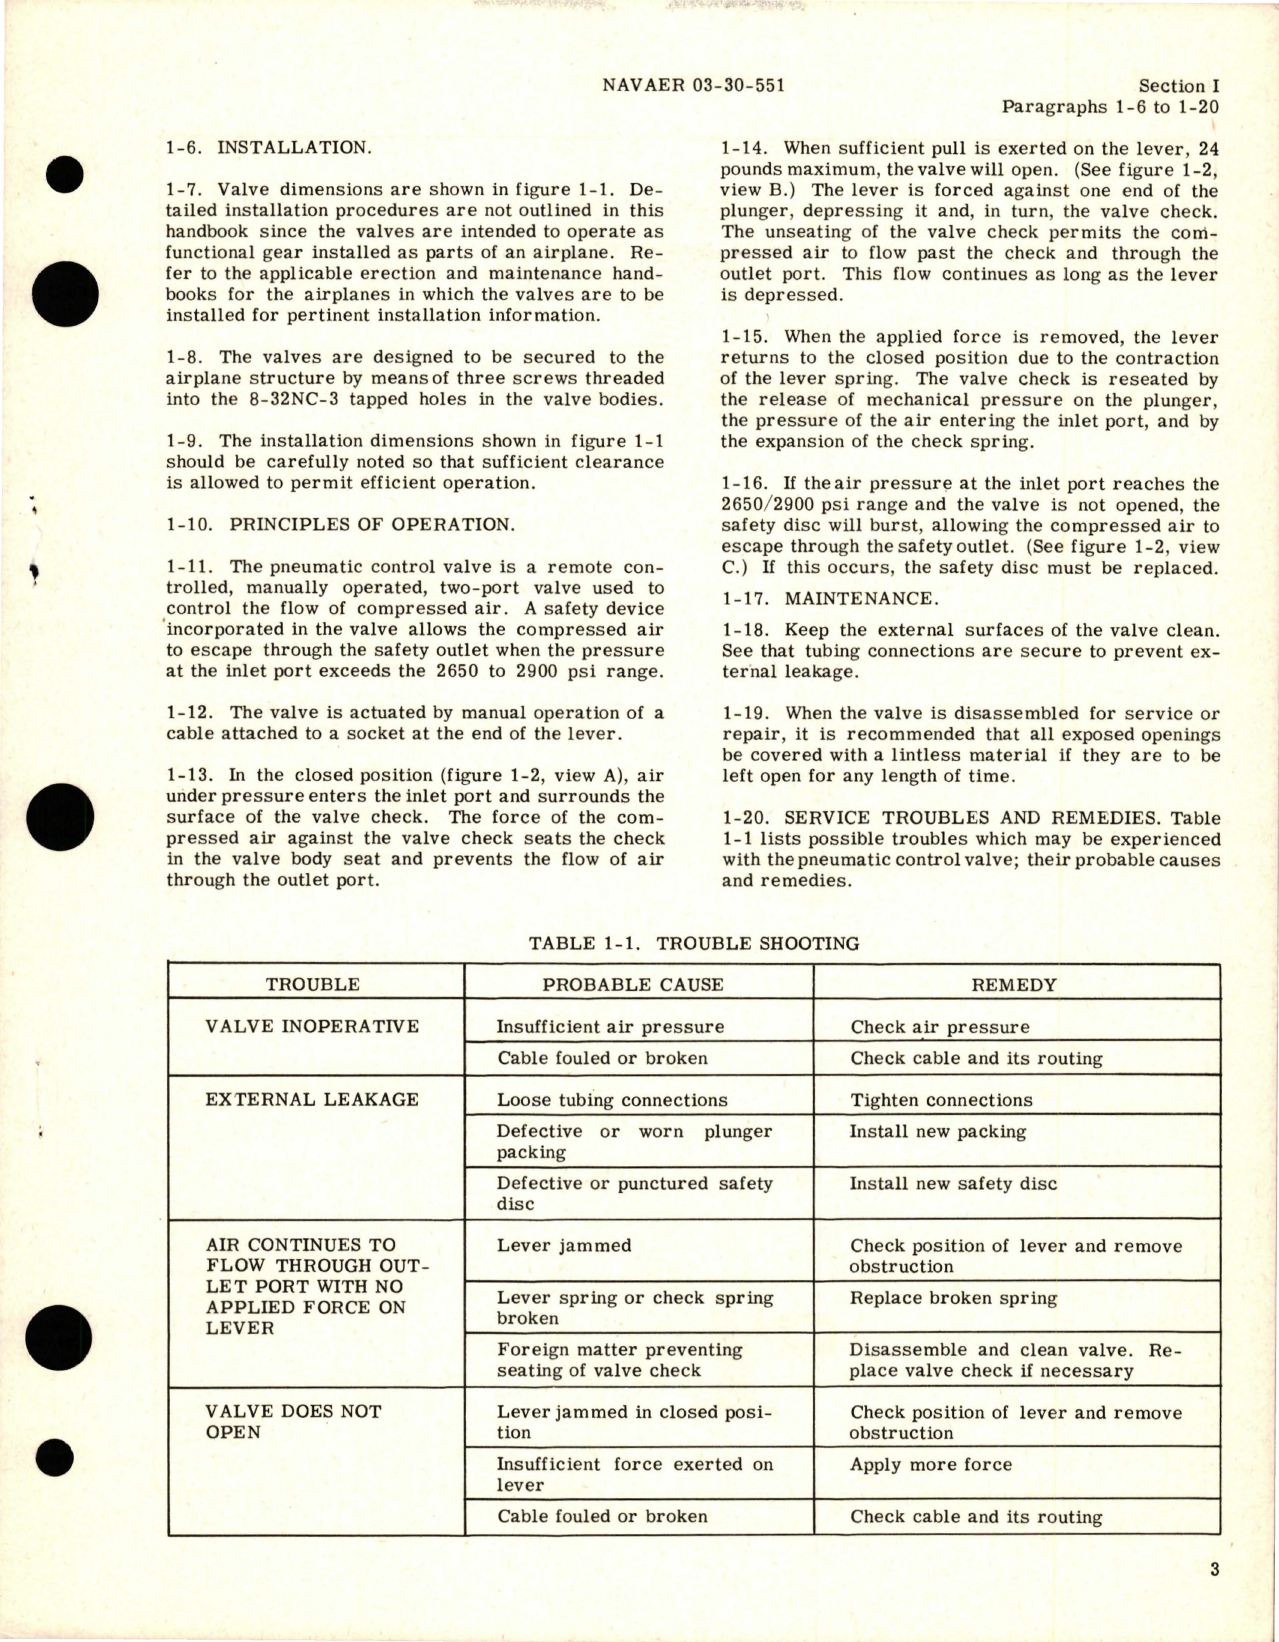 Sample page 5 from AirCorps Library document: Operation, Service and Overhaul Instructions with Parts Catalog for Pneumatic Control Valves